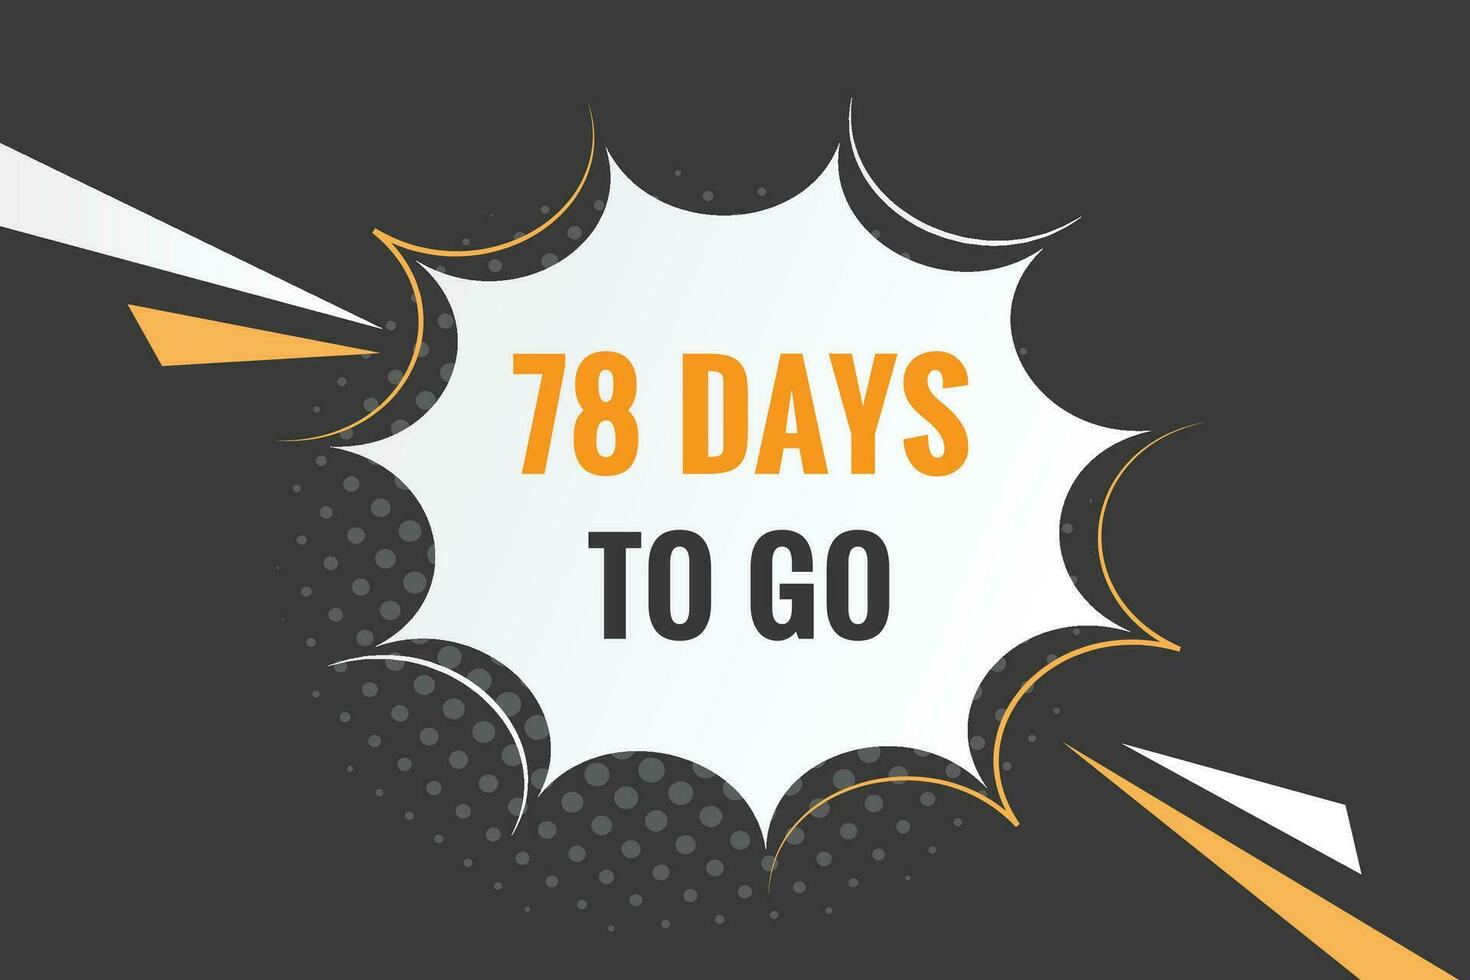 78 days to go countdown template. 78 day Countdown left days banner design vector